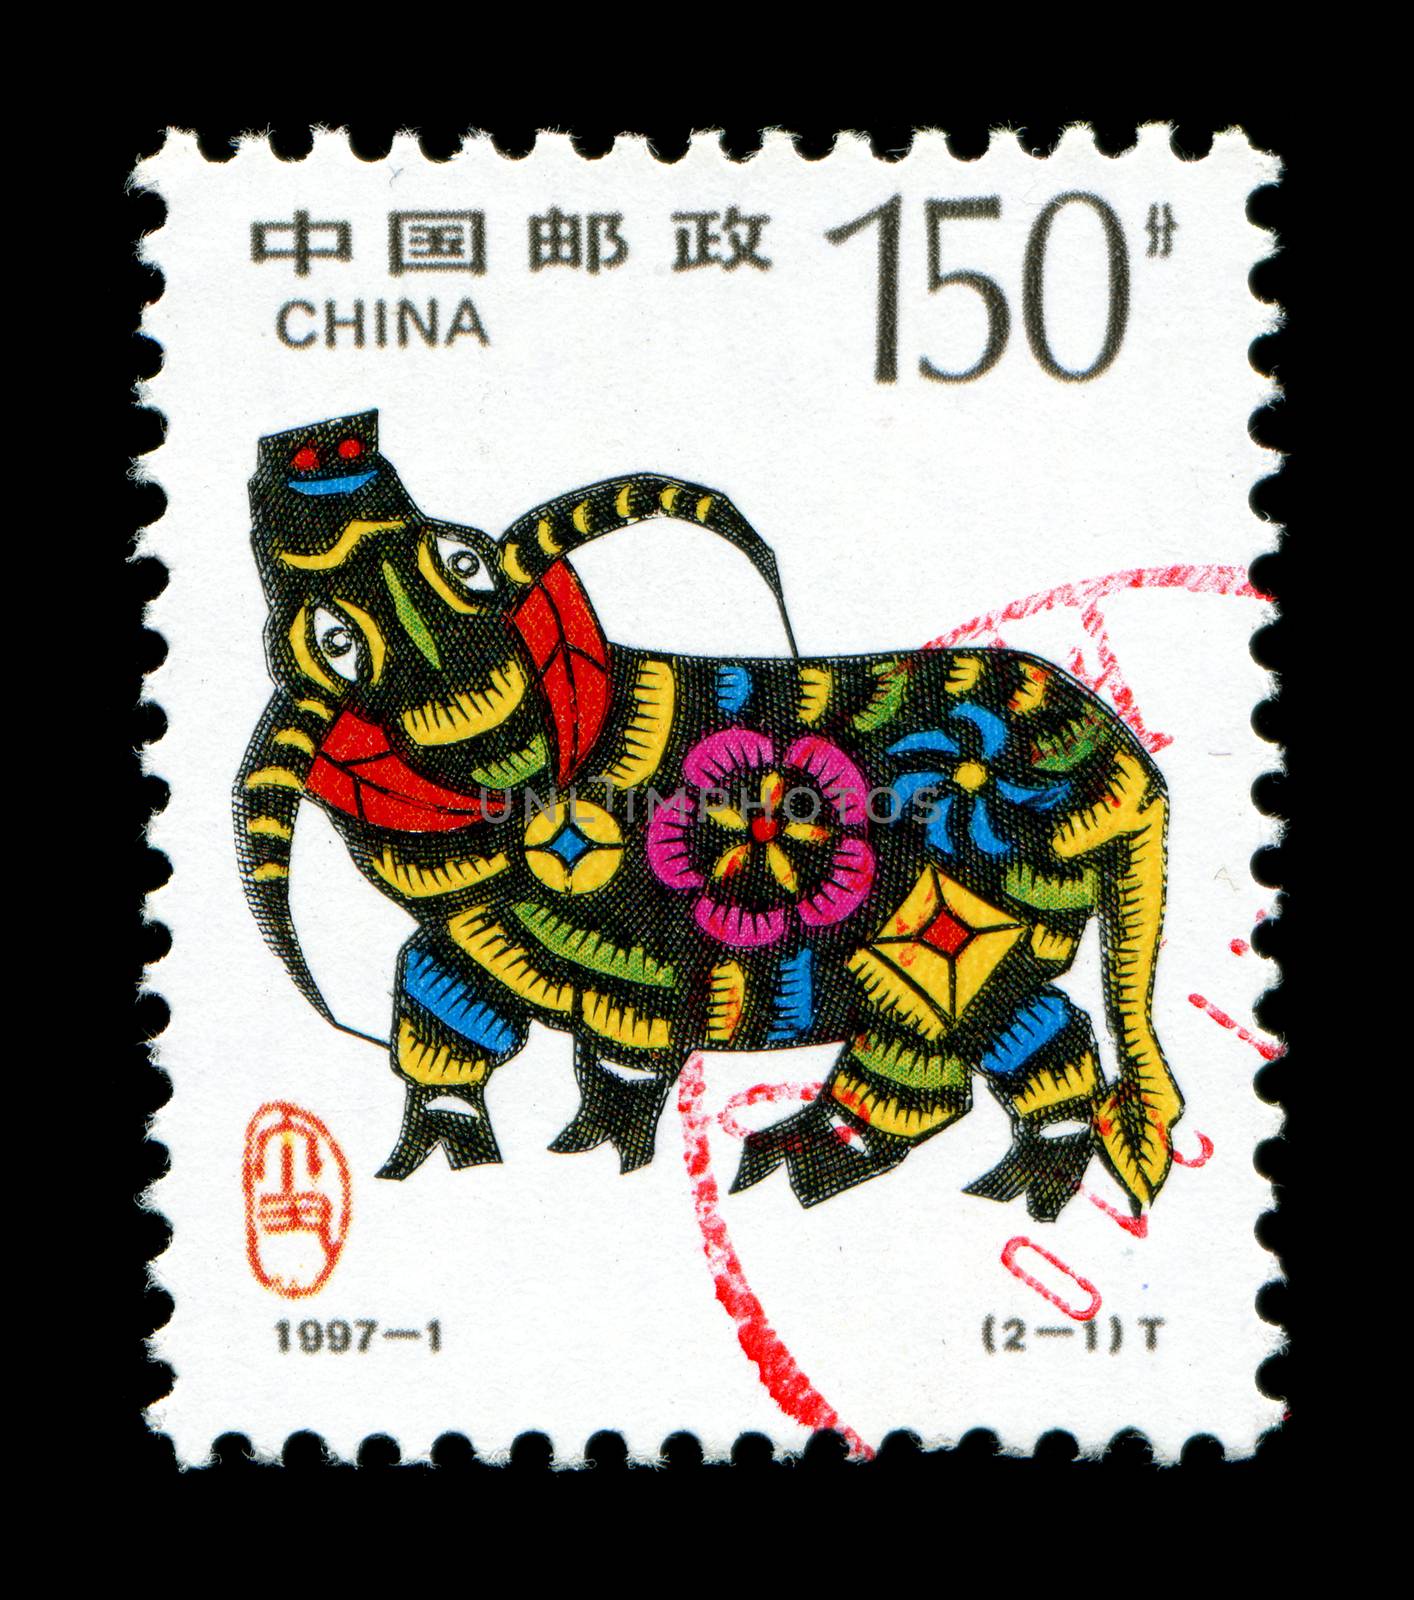 Year of the Ox in postage stamp by myyaym